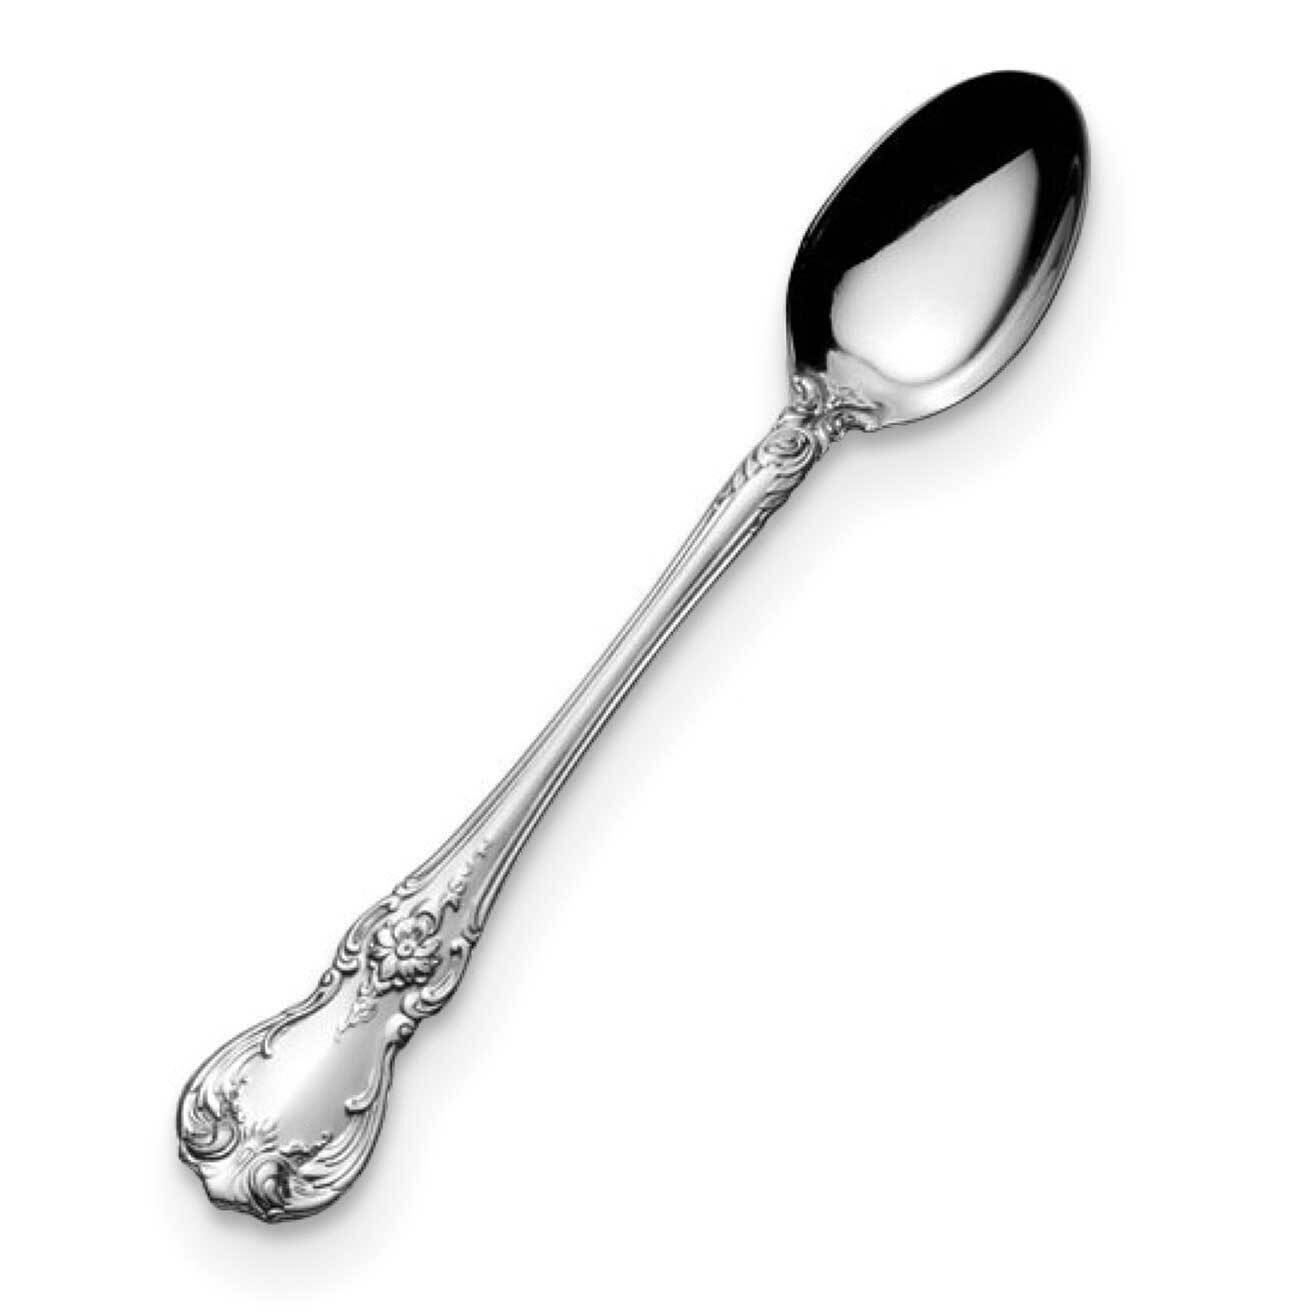 Towle Old Master Sterling Silver Infant Feeding Spoon GM21977